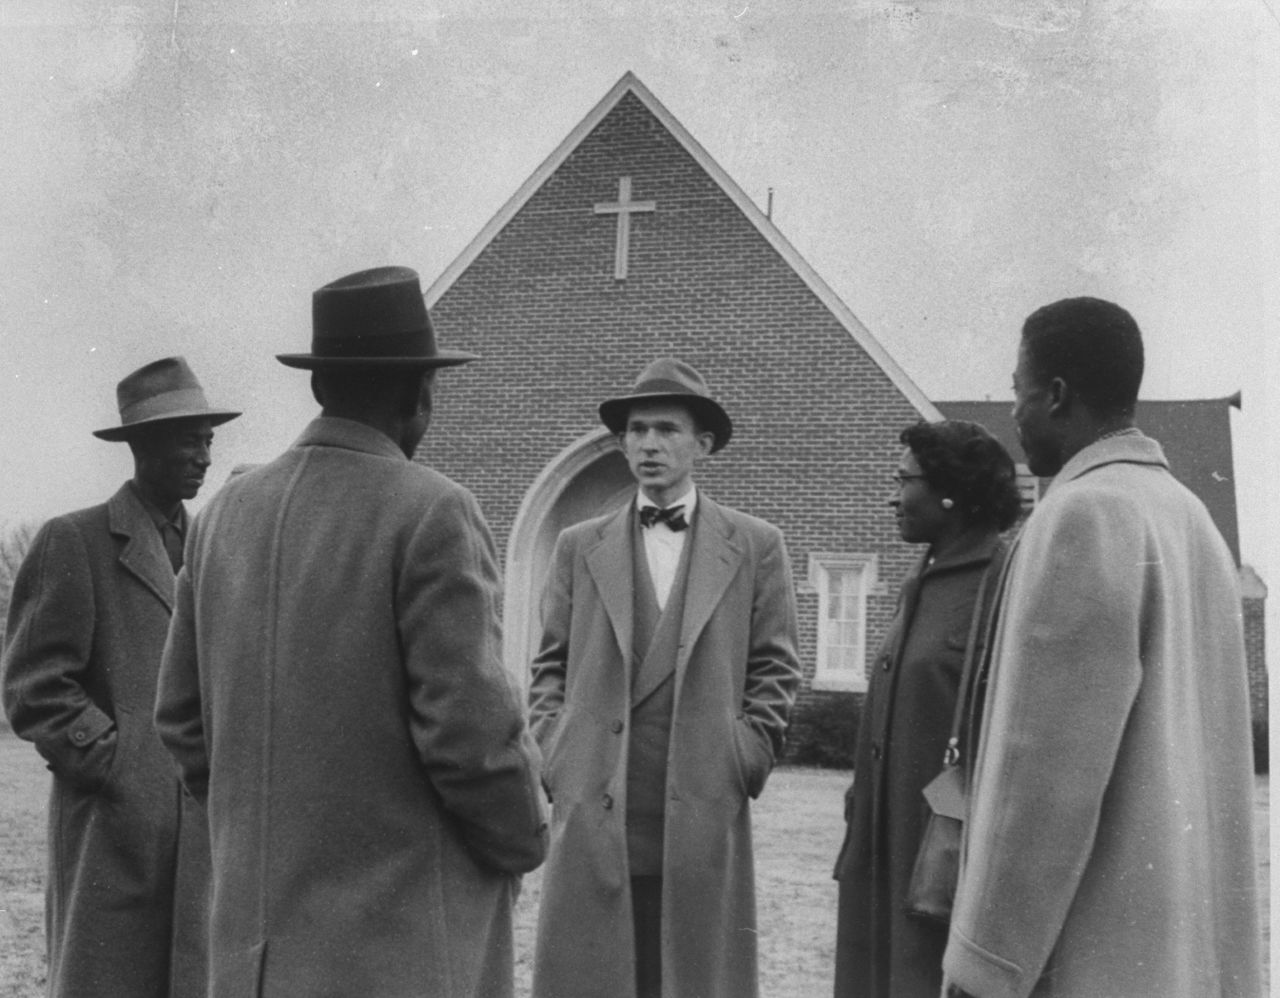 <a href="https://www.cnn.com/2020/09/21/us/graetz-death-trnd/index.html" target="_blank">Robert Graetz</a>, a White minister famously known for his support of the Montgomery bus boycott, died on September 20, according to a Facebook post from the Southeastern Synod Evangelical Lutheran Church in America. Graetz was 92, according to the Stanford University King Institute's biography of him.